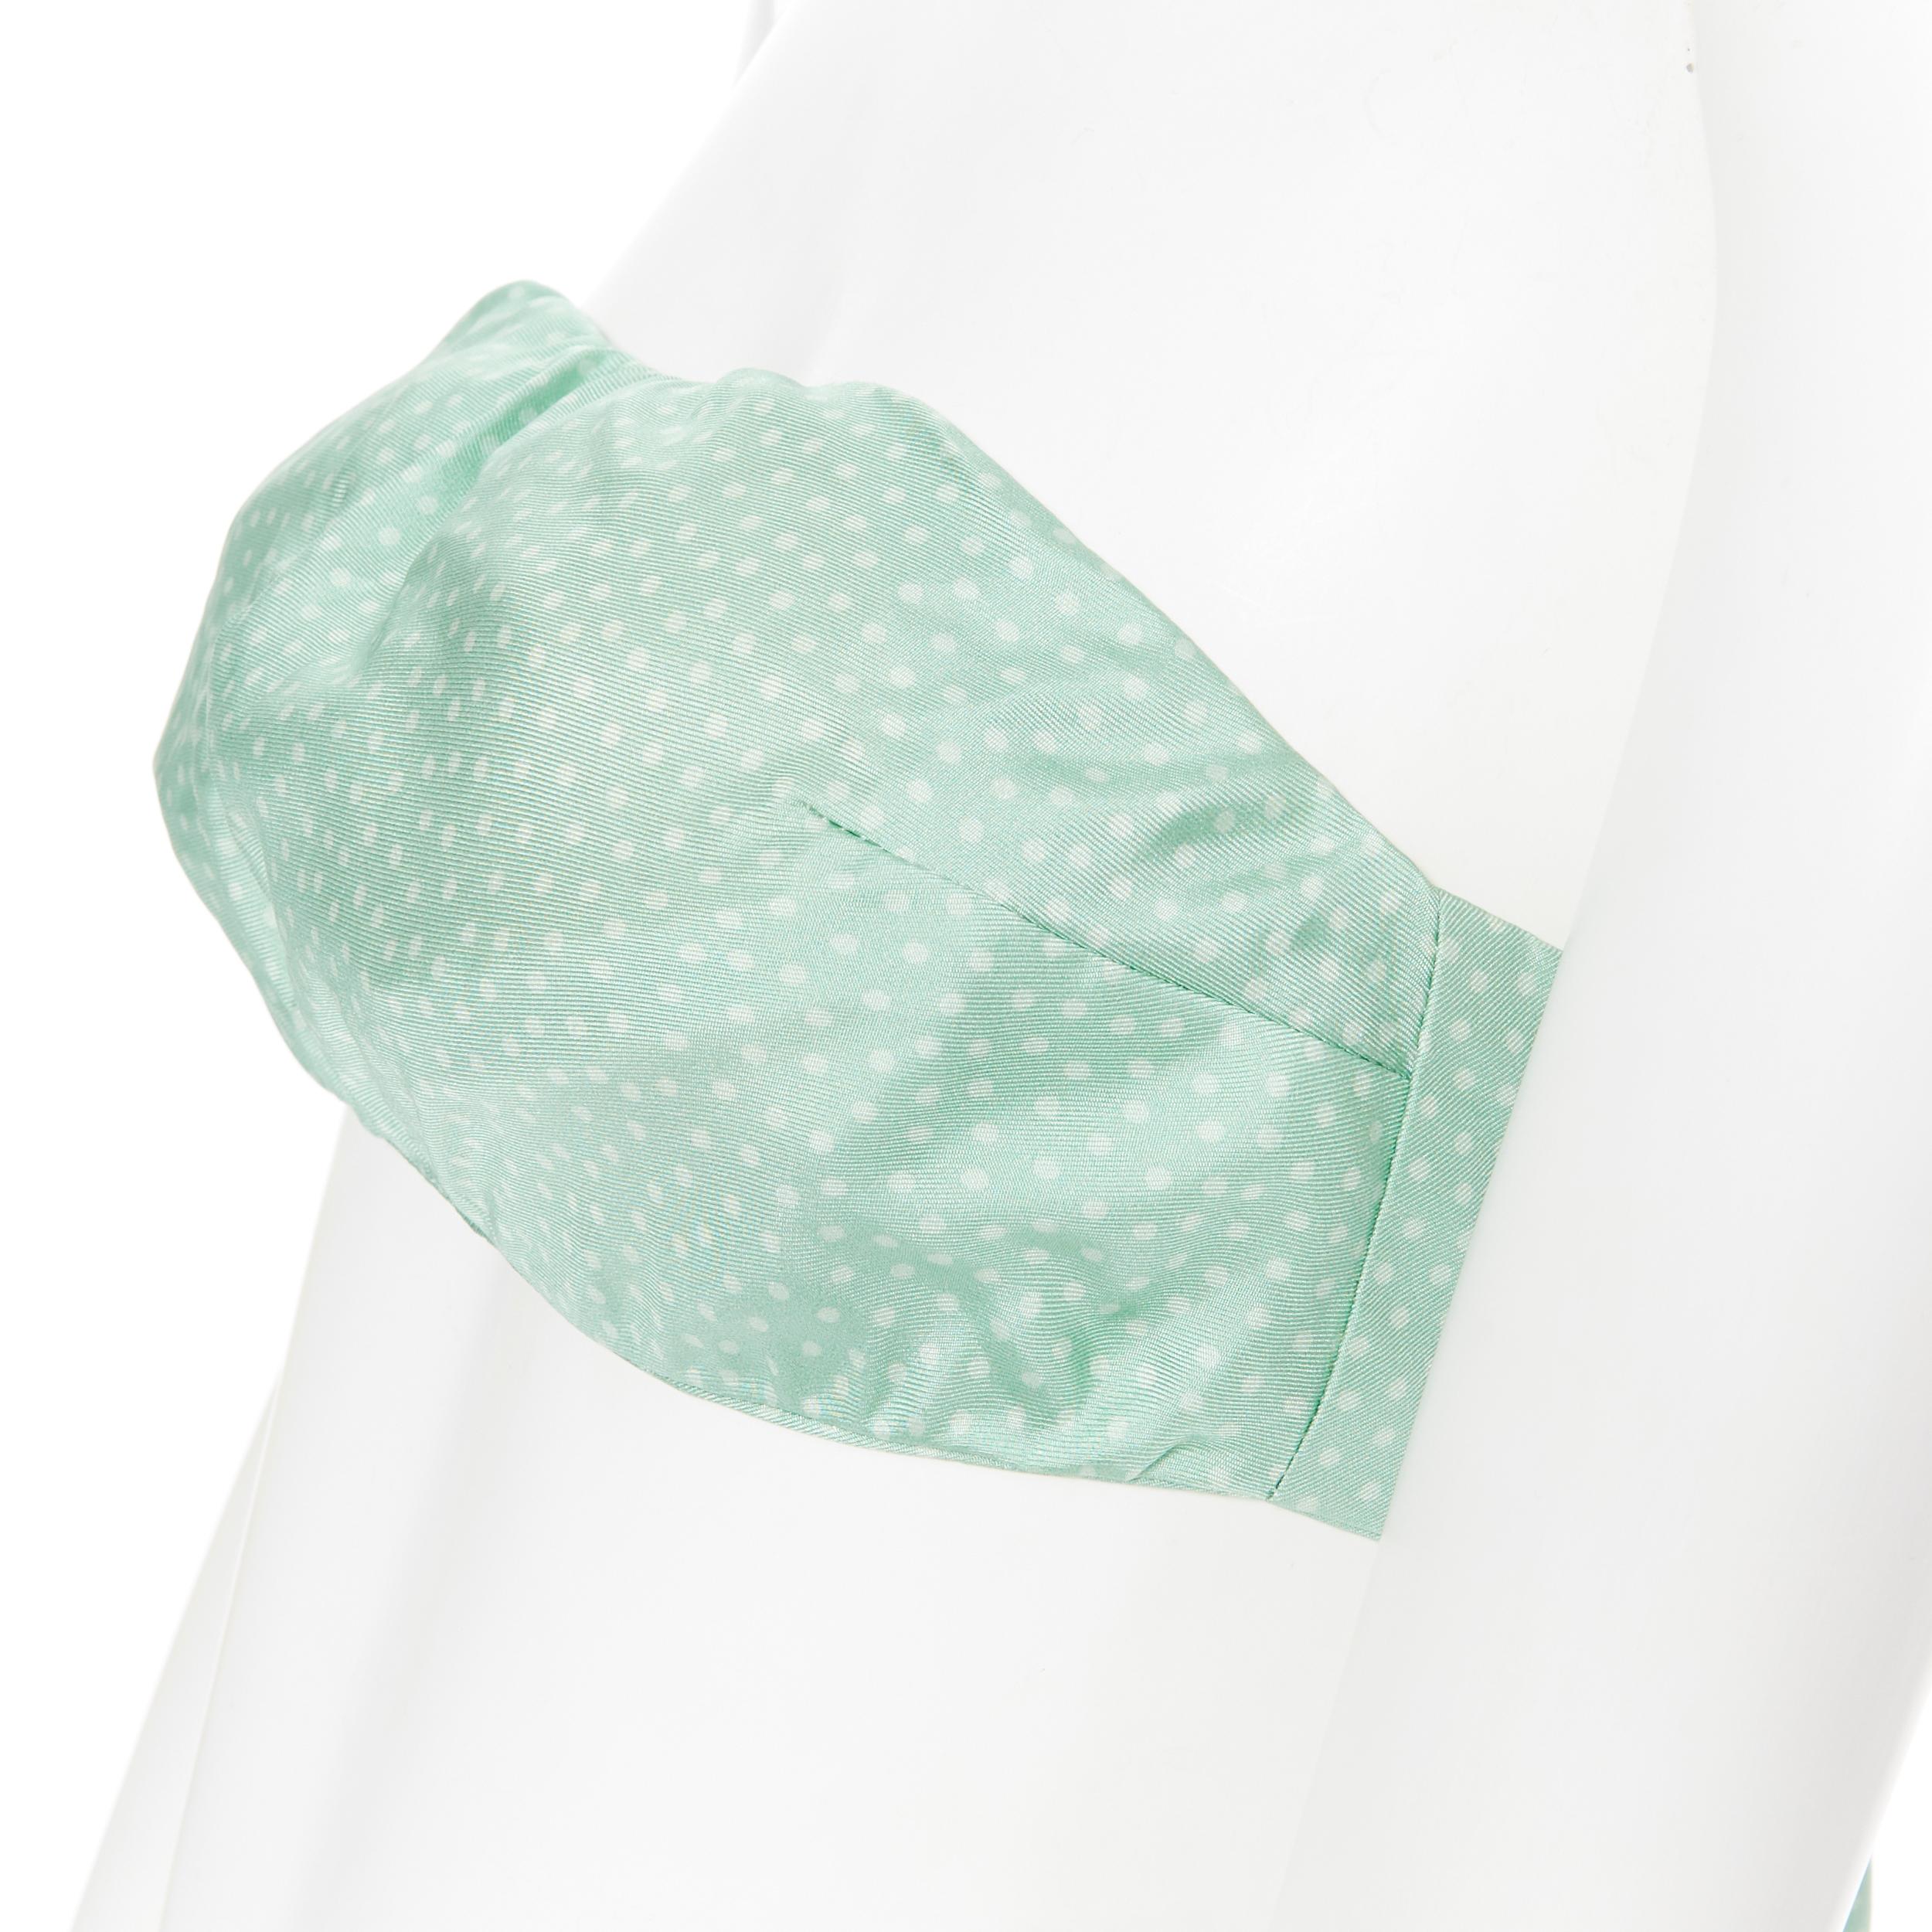 CULT GAIA 100% silk pastel green polkadot padded tie back strapless bandeau XS
Brand: Cult Gaia
Model Name / Style: Bustier top
Material: Silk
Color: Green
Pattern: Polka Dot
Closure: Tie
Extra Detail: Padded bust. Bust darts. Self tie. Strapless